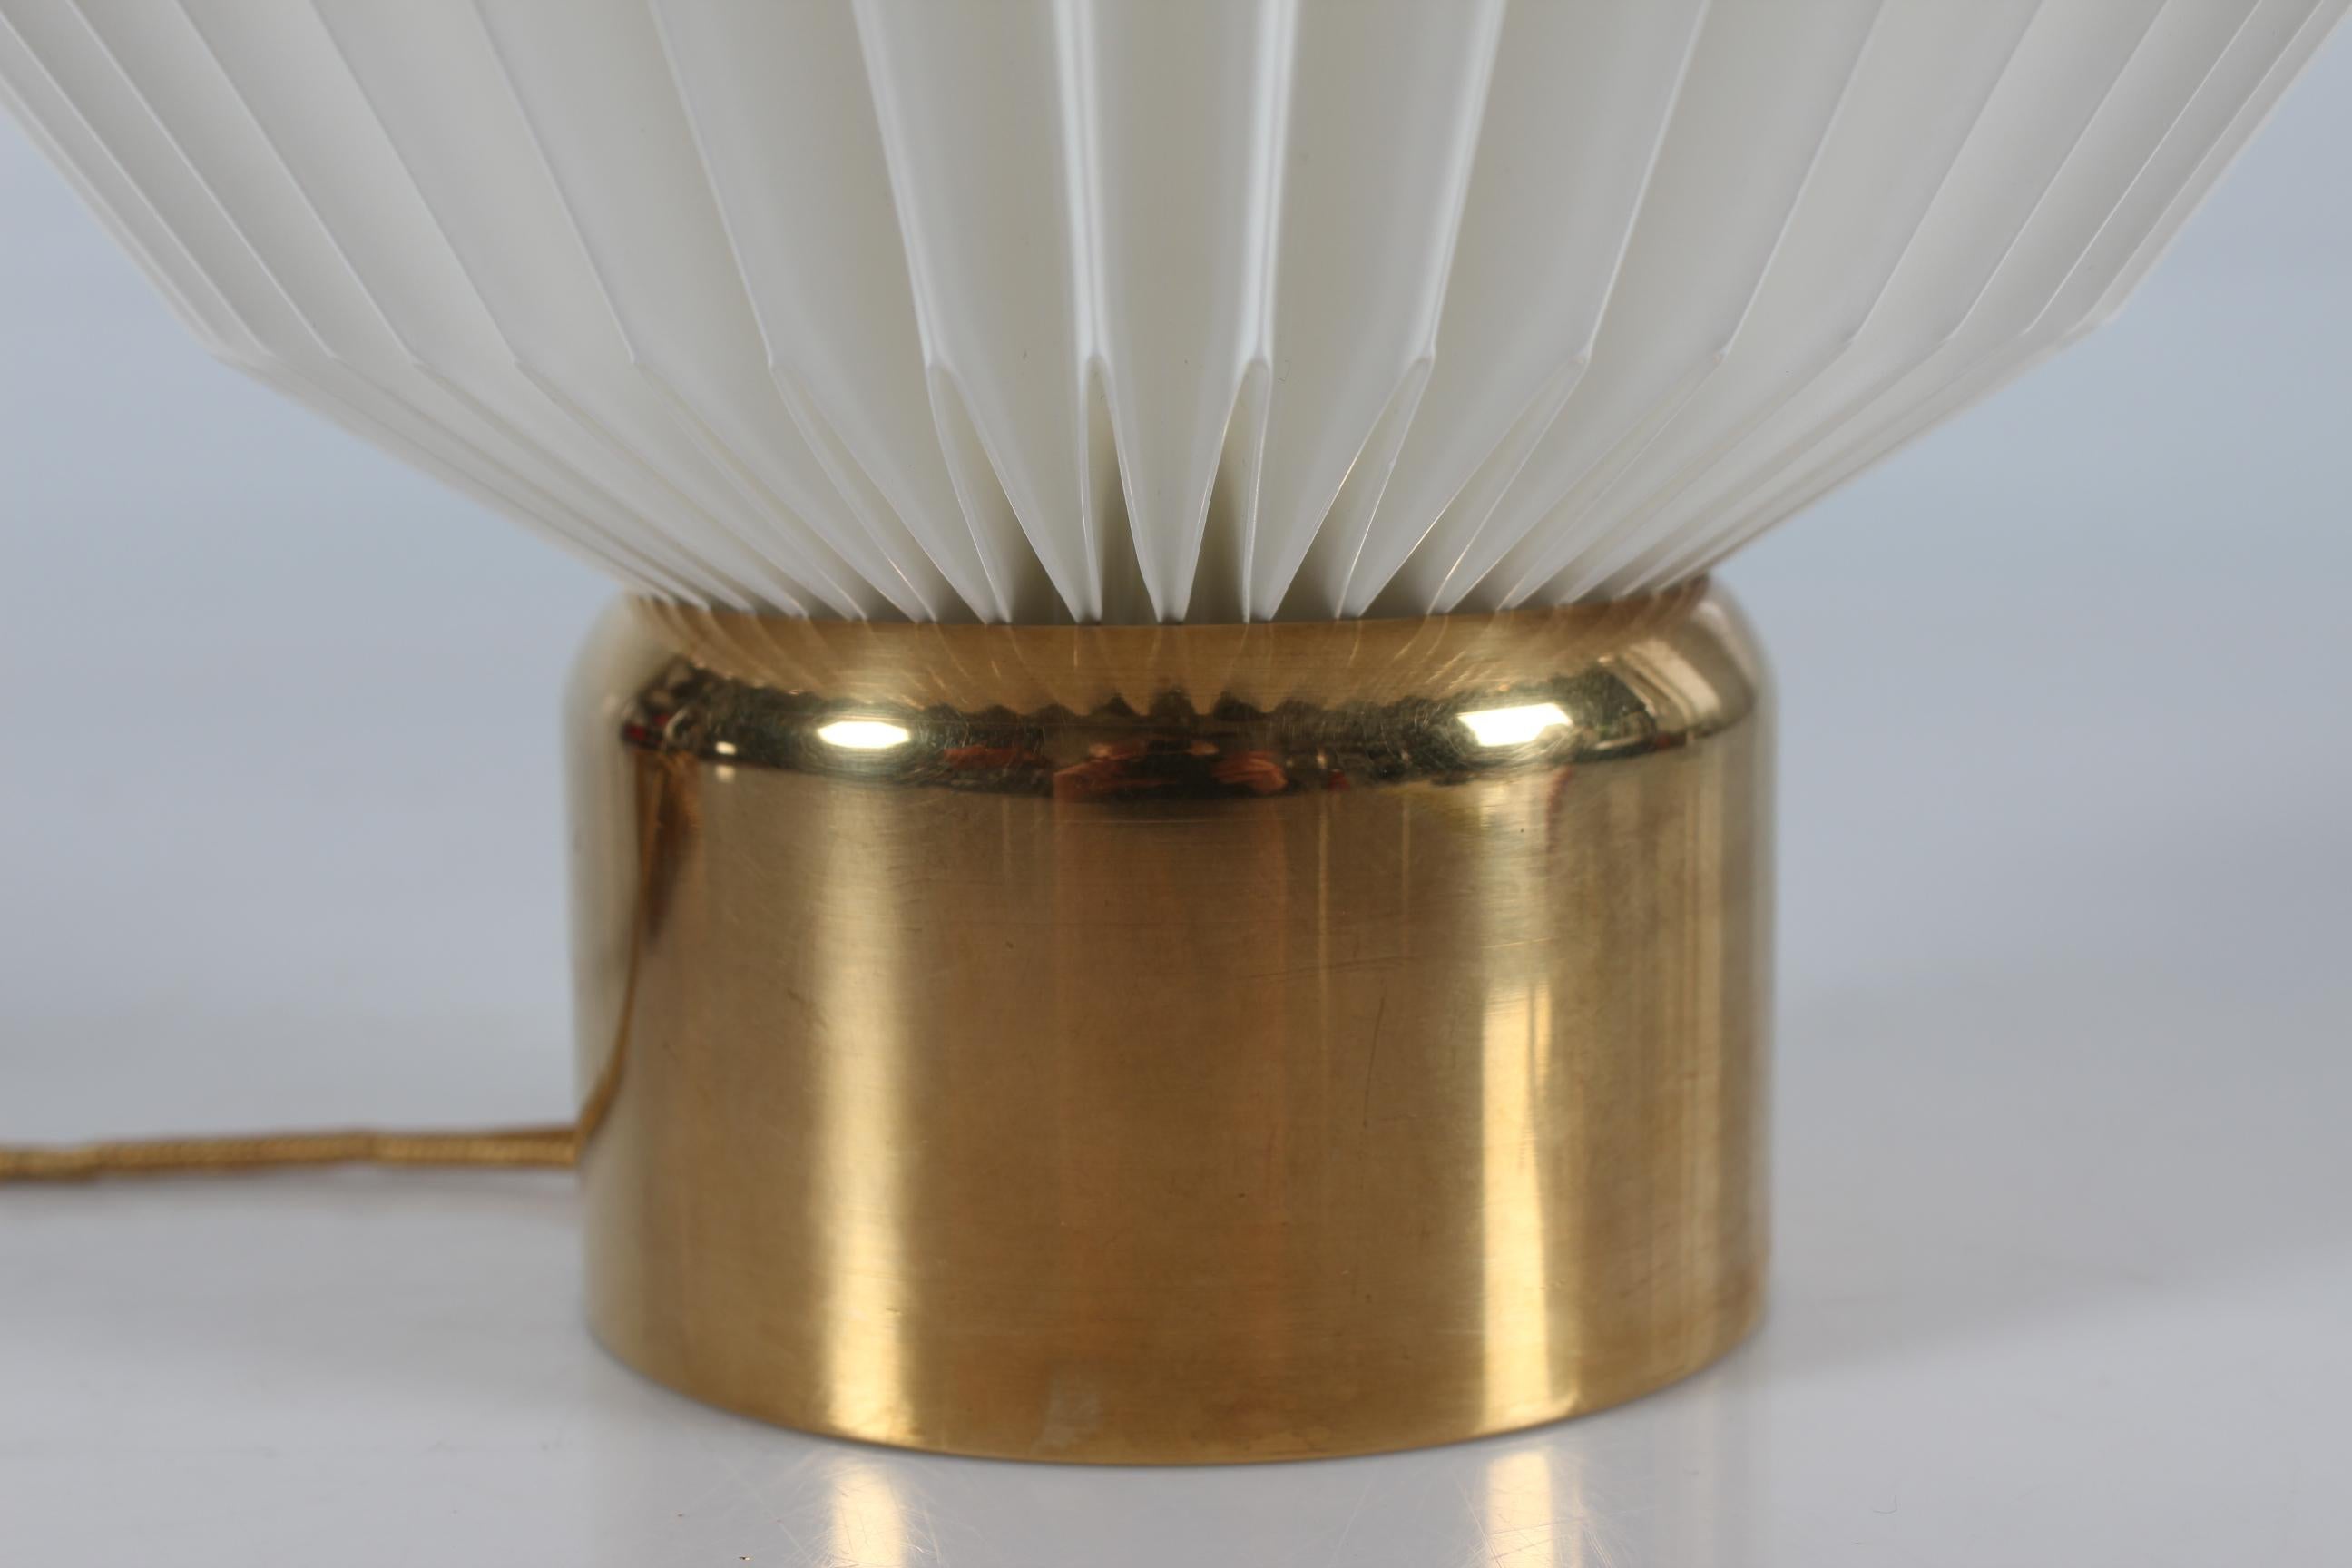 Rare vintage Le Klint table lamp model no. 375 designed by Esben Klint in the 1940's for Le Klint. 

The lampbase is made of turned solid brass in strong quality mounted with a newer lampshade made by Le Klint.

Measures: height incl lampbase 28